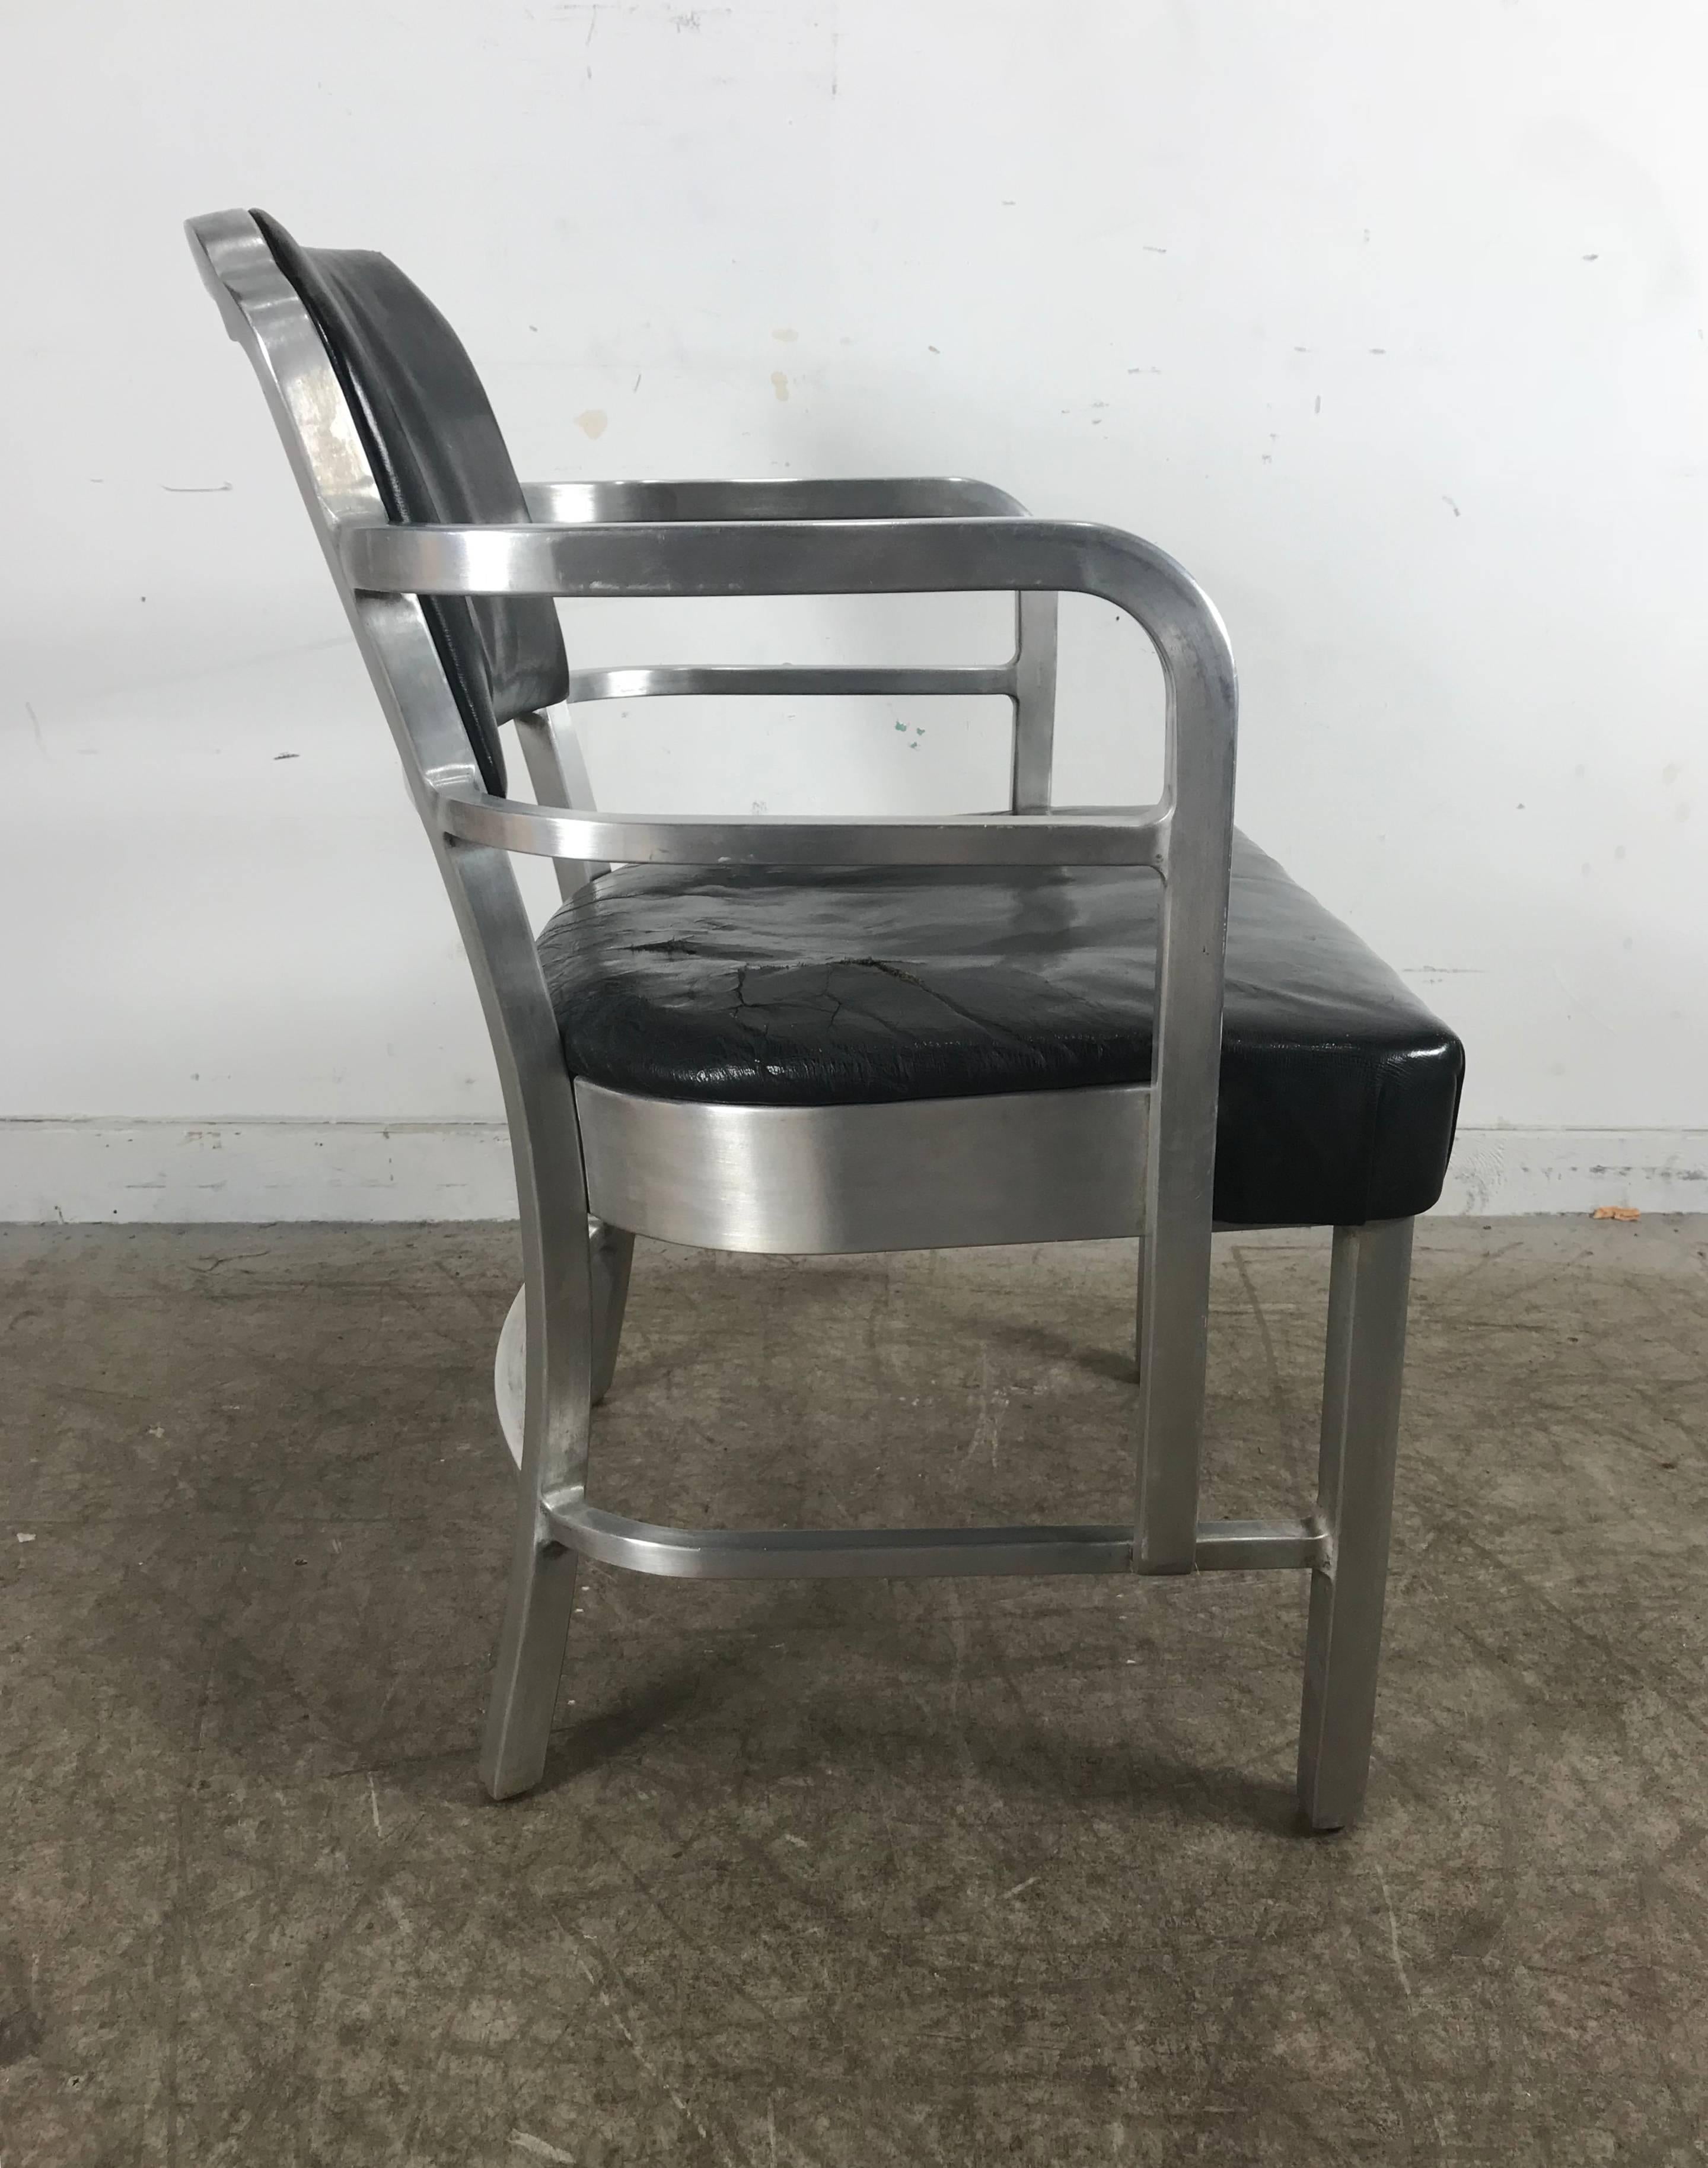 Art Deco. Machine age aluminum and leather armchair by GoodForm. General Fireproofing with its design elements of KEM Weber and Warren McArthur, it’s easily the best Aluminum armchair ever produced by GoodForm.